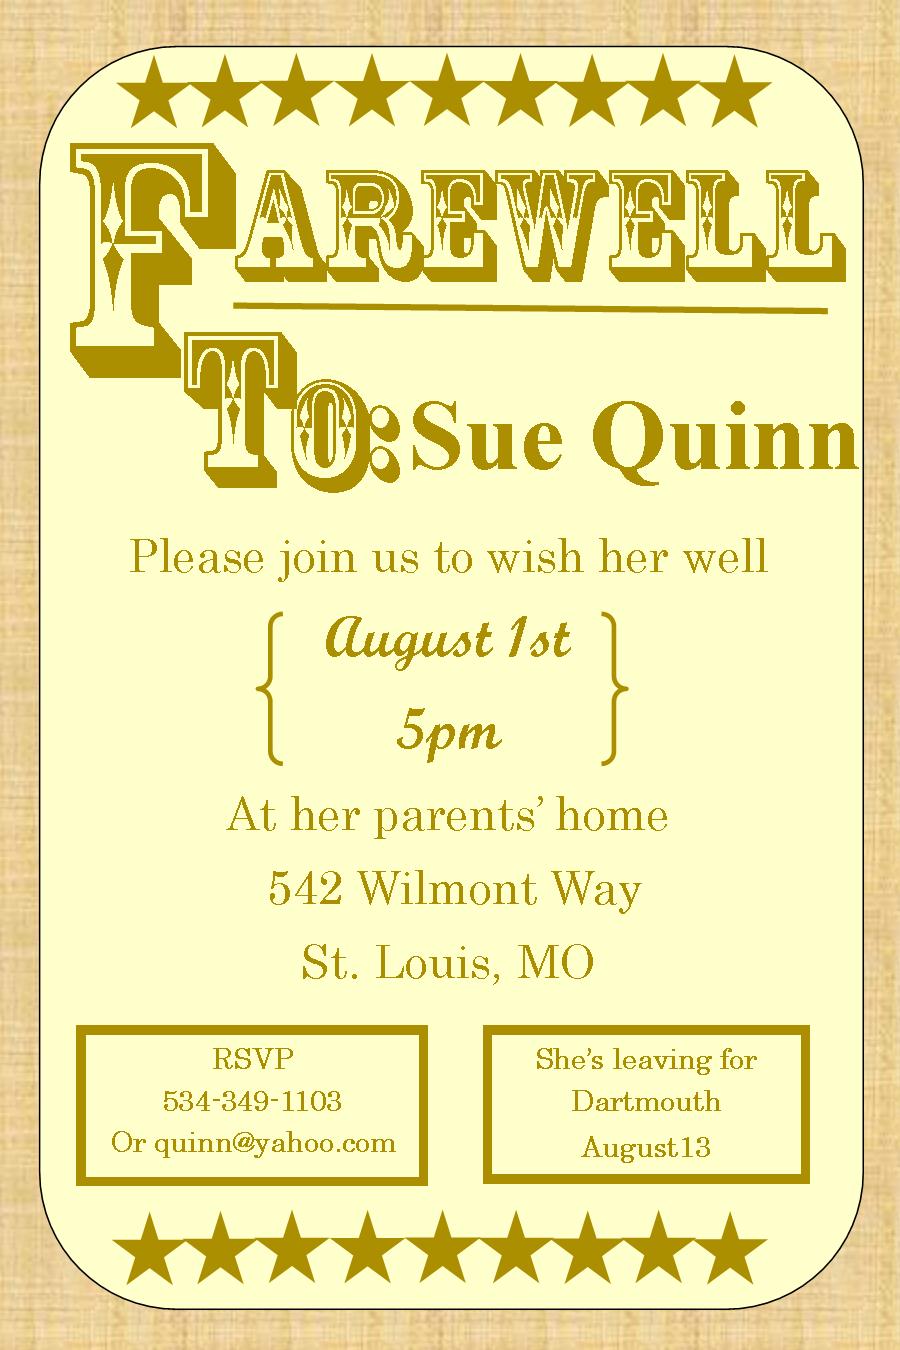 Going Away Invite Template